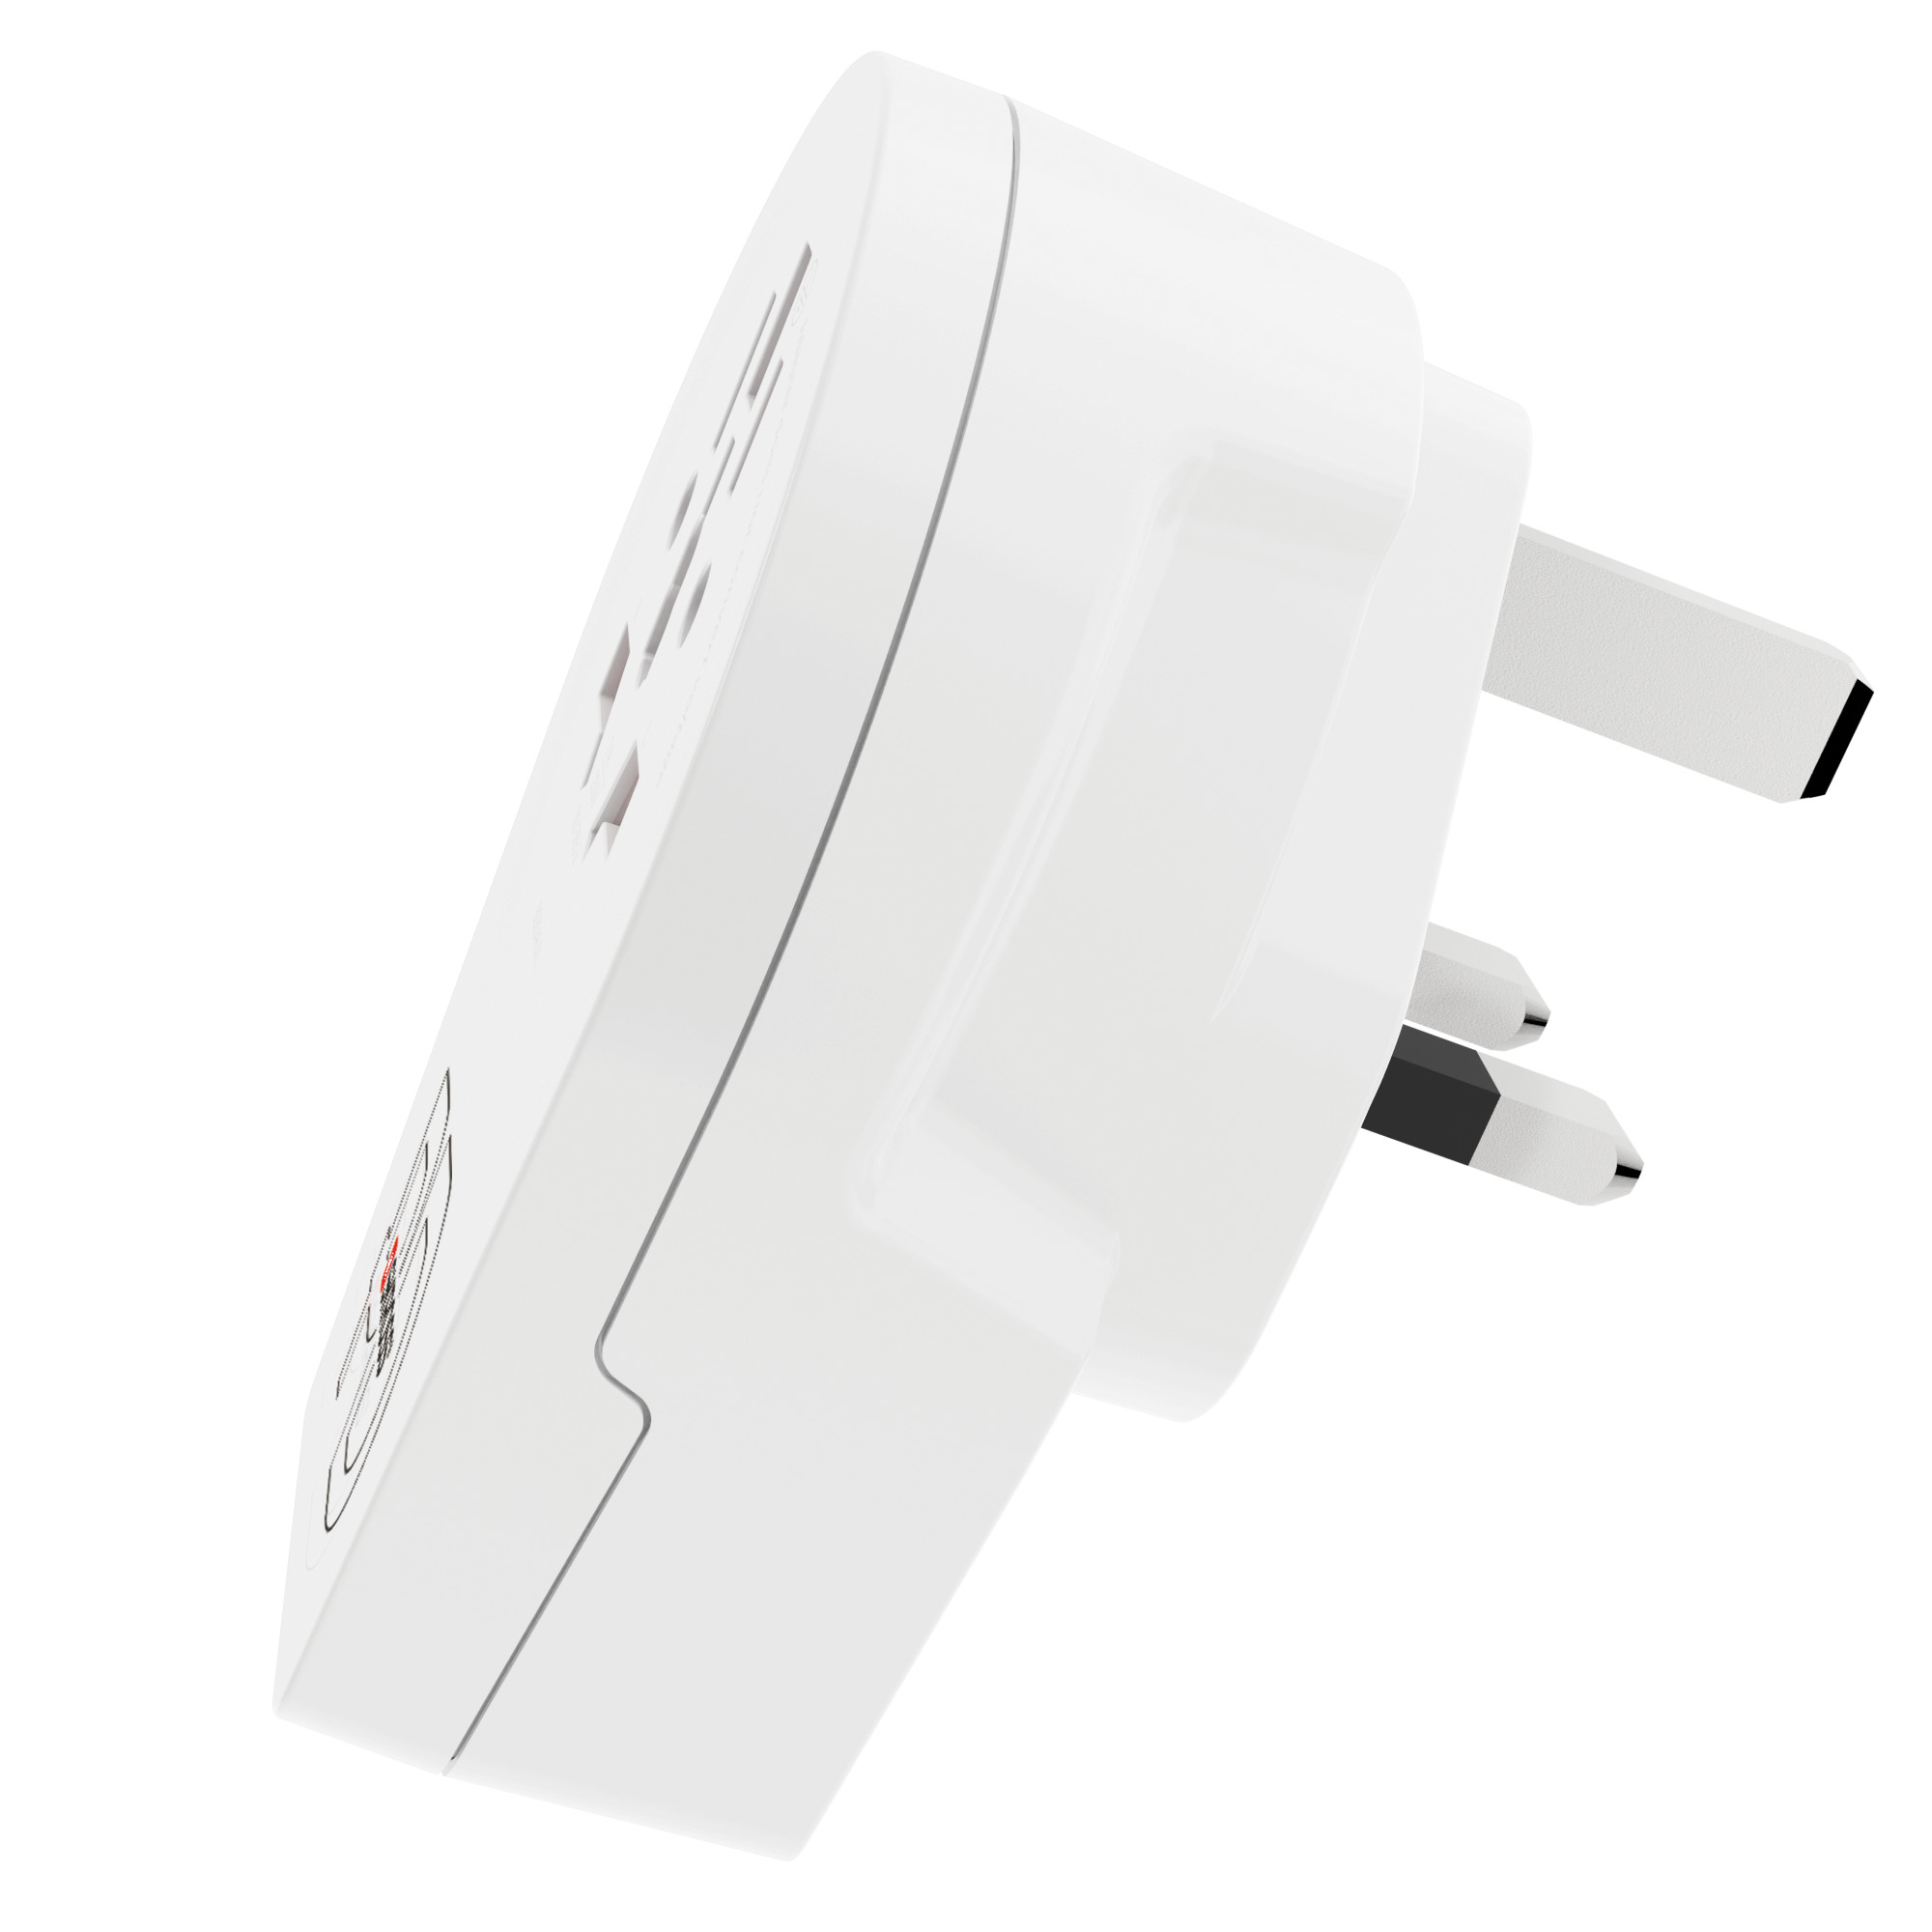 SKROSS Country Travel Adapter 1.500291 World to UK USB C20PD